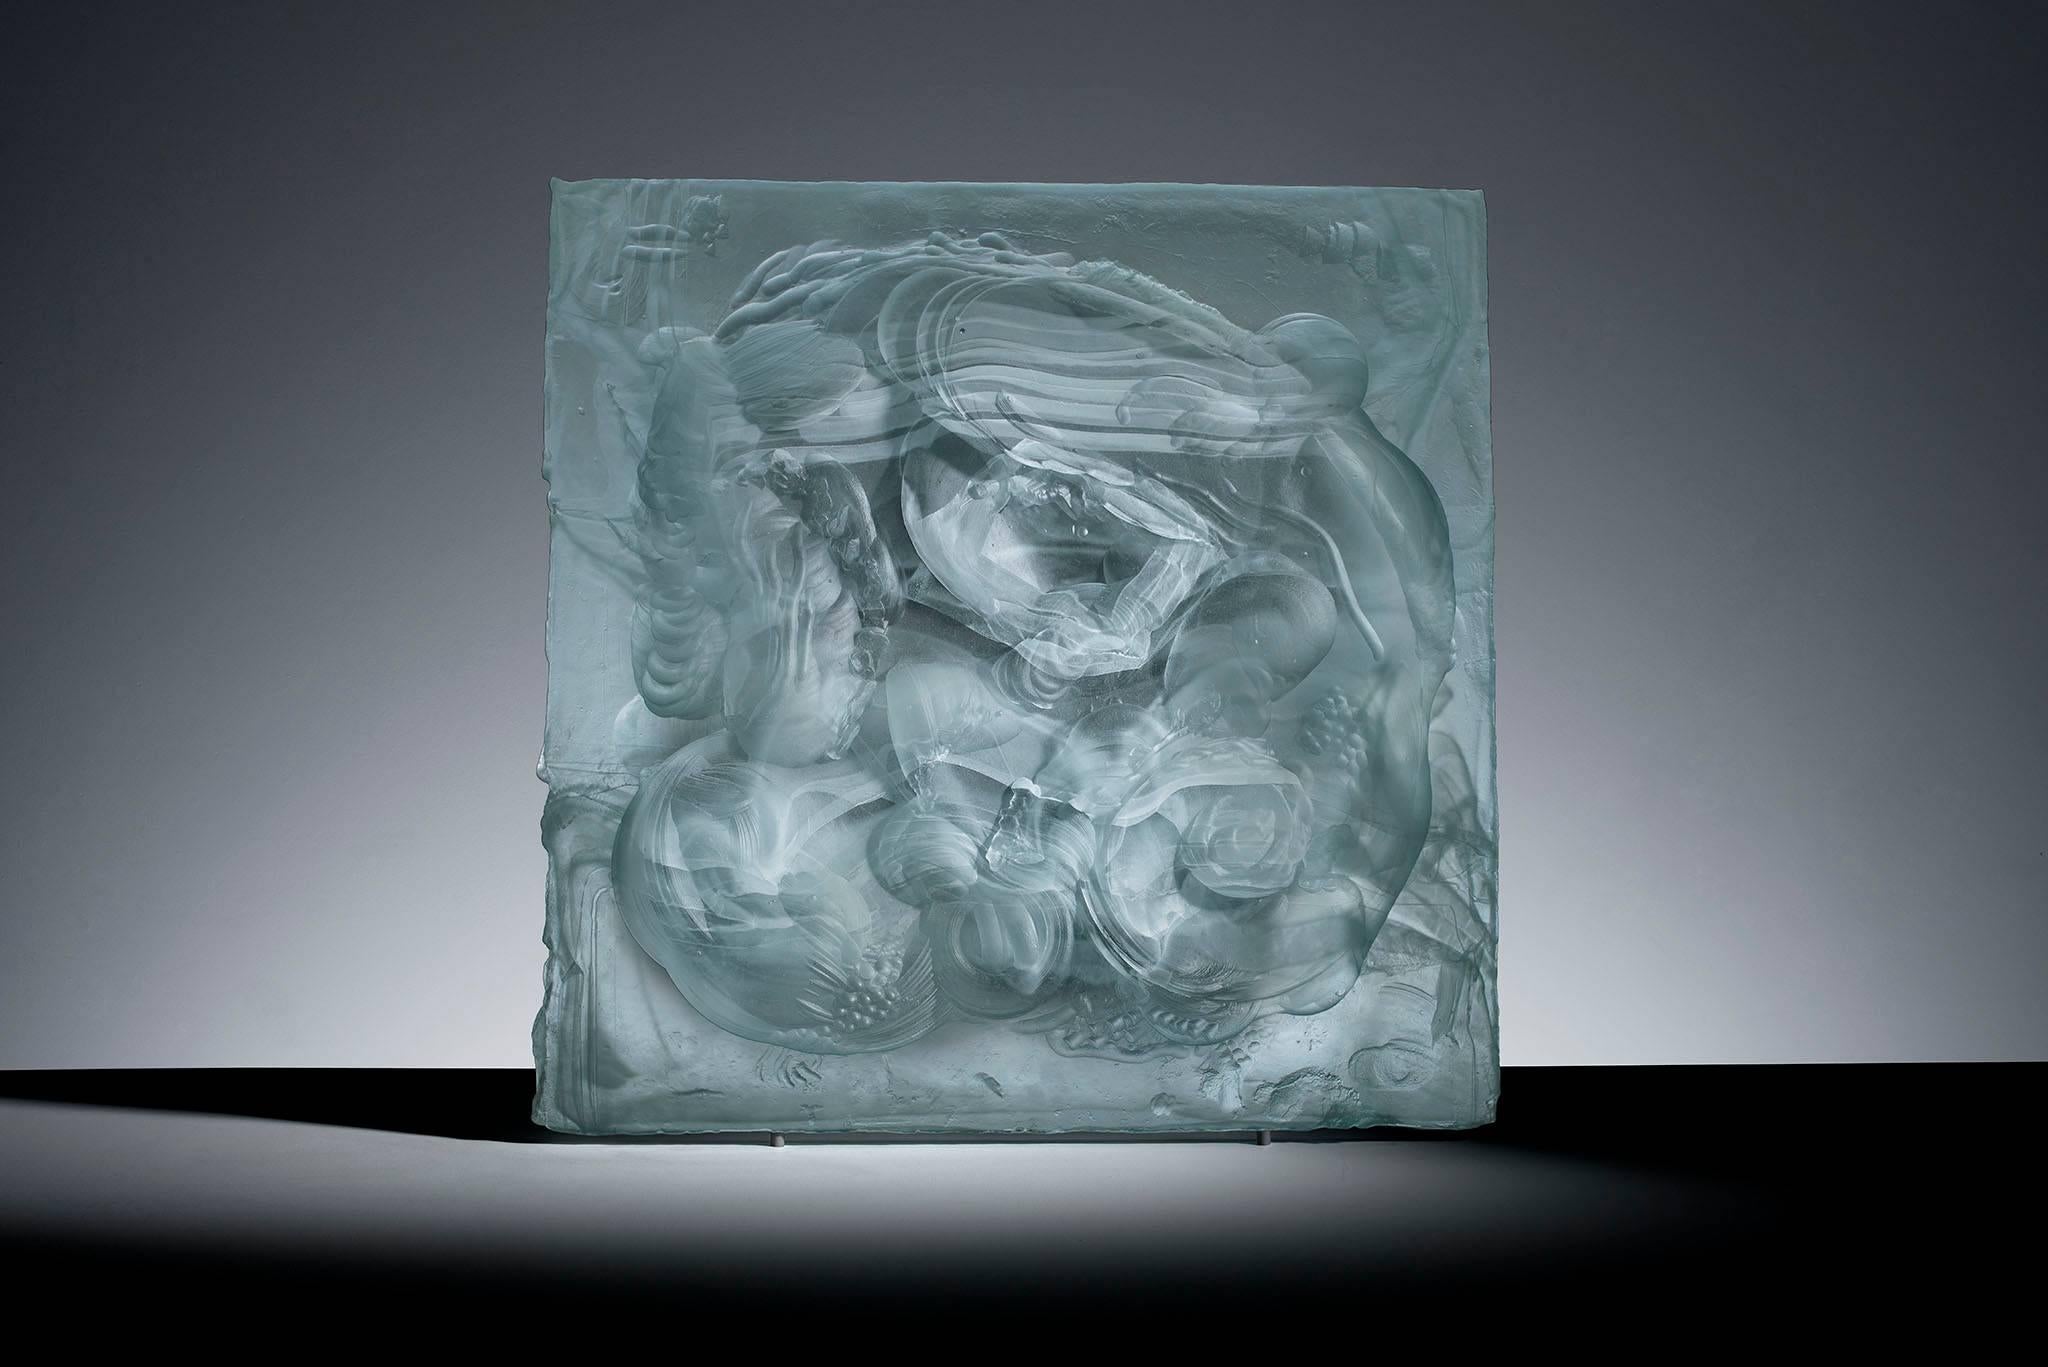 Carved cast 2 unique cast glass relief sculpture.

This relief cast artwork is formed by melting low iron glass into a hand drawn plaster mould. Danny Lane has been developing this technique for the past couple of years. The glass is transformed